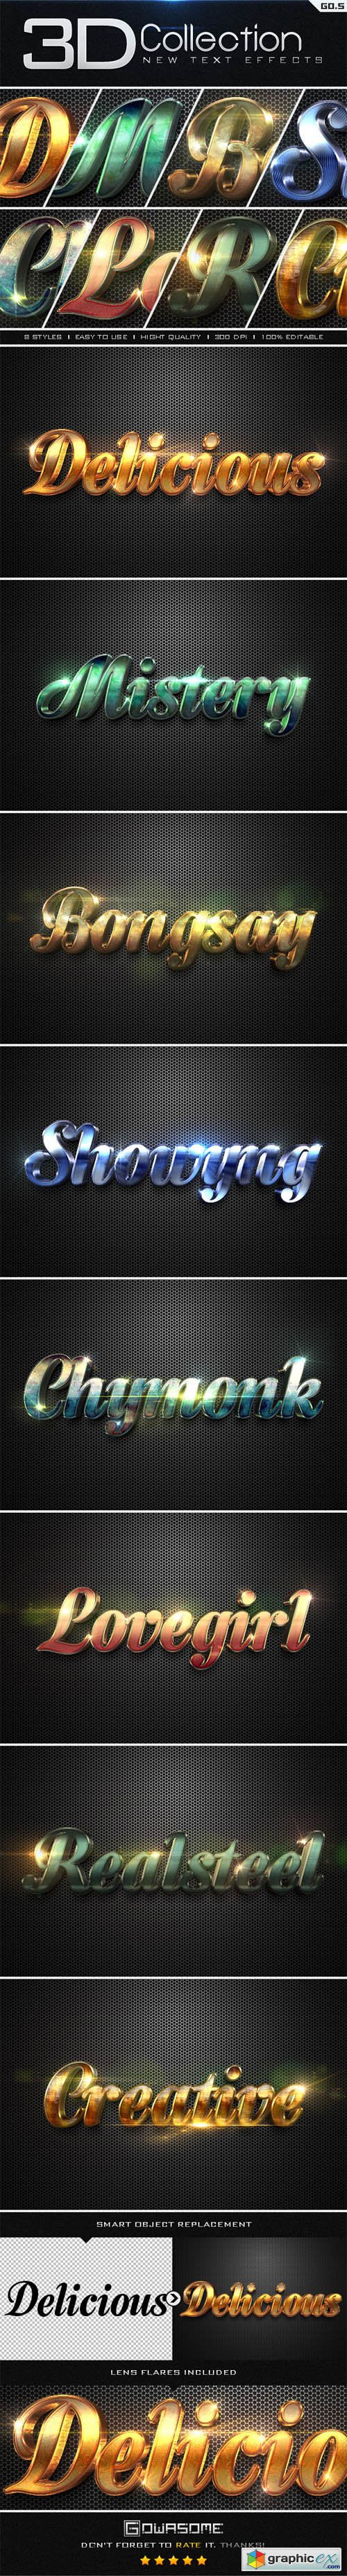 New 3D Collection Text Effects GO.5